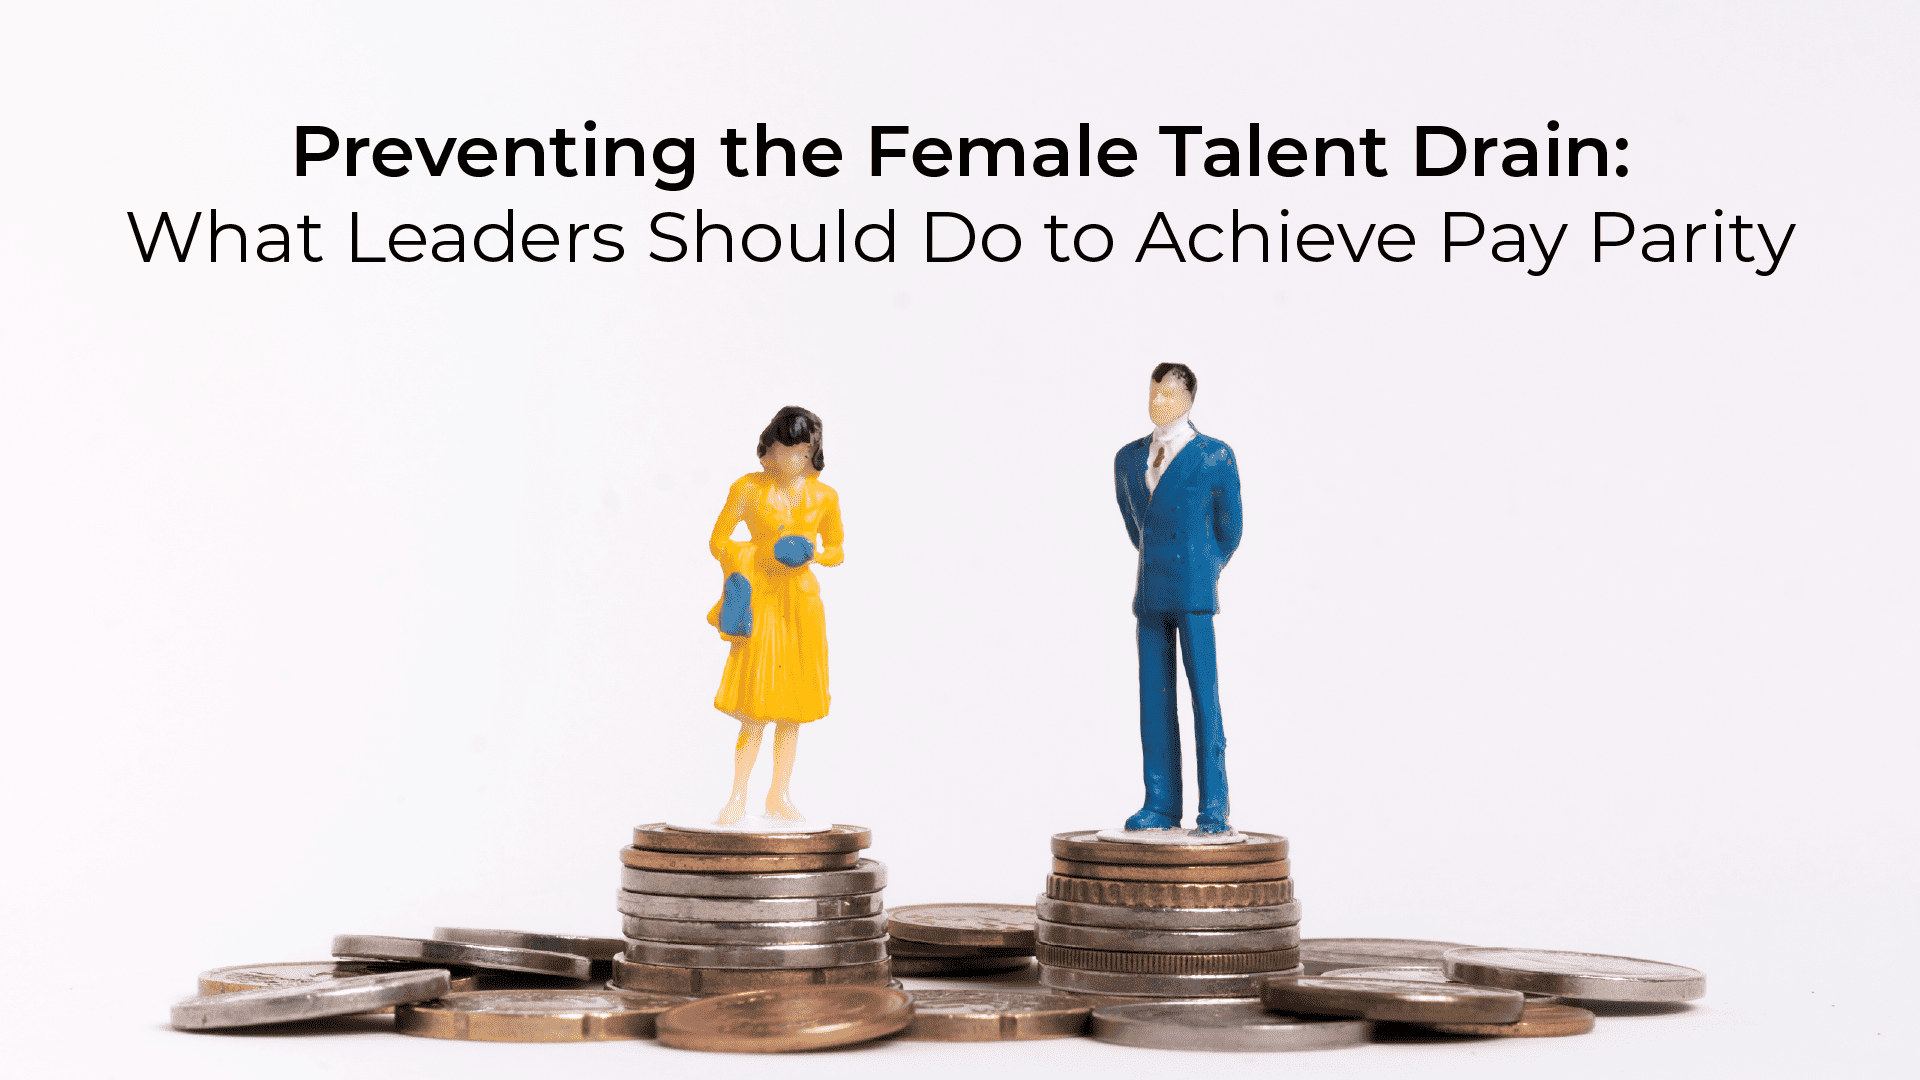 Preventing the Female Talent Drain:  What Leaders Should Do to Achieve Pay Parity